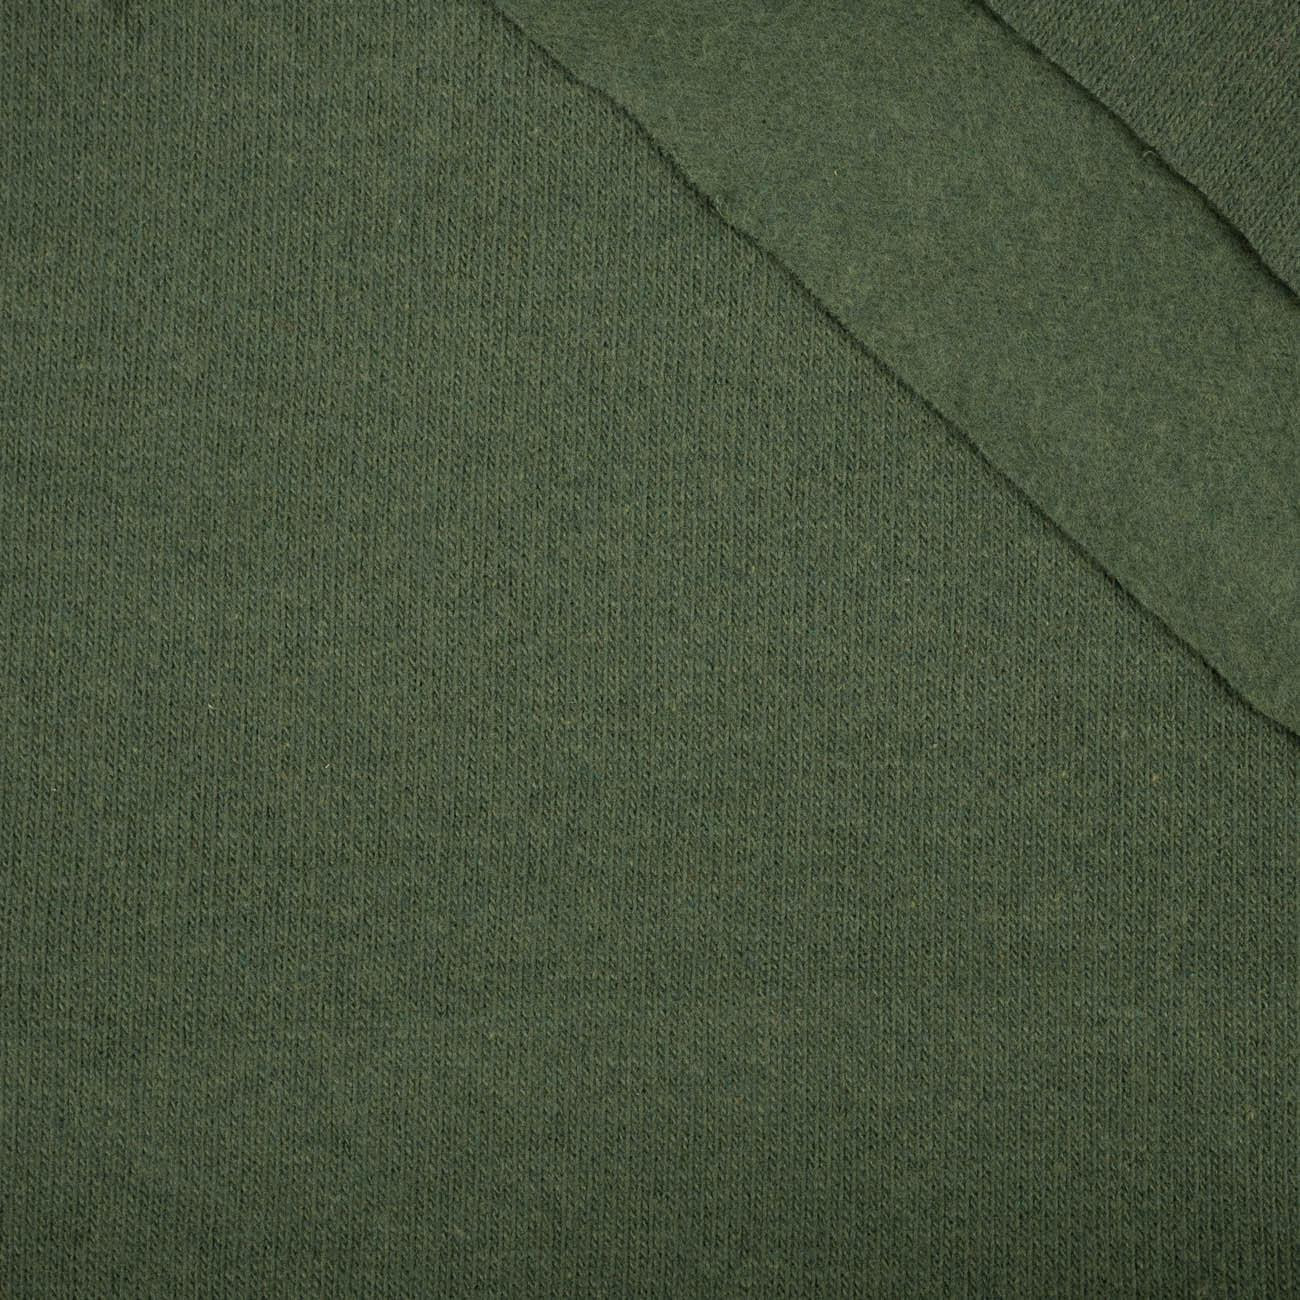 OLIVE GREEN - Emery sweater knit. 270g